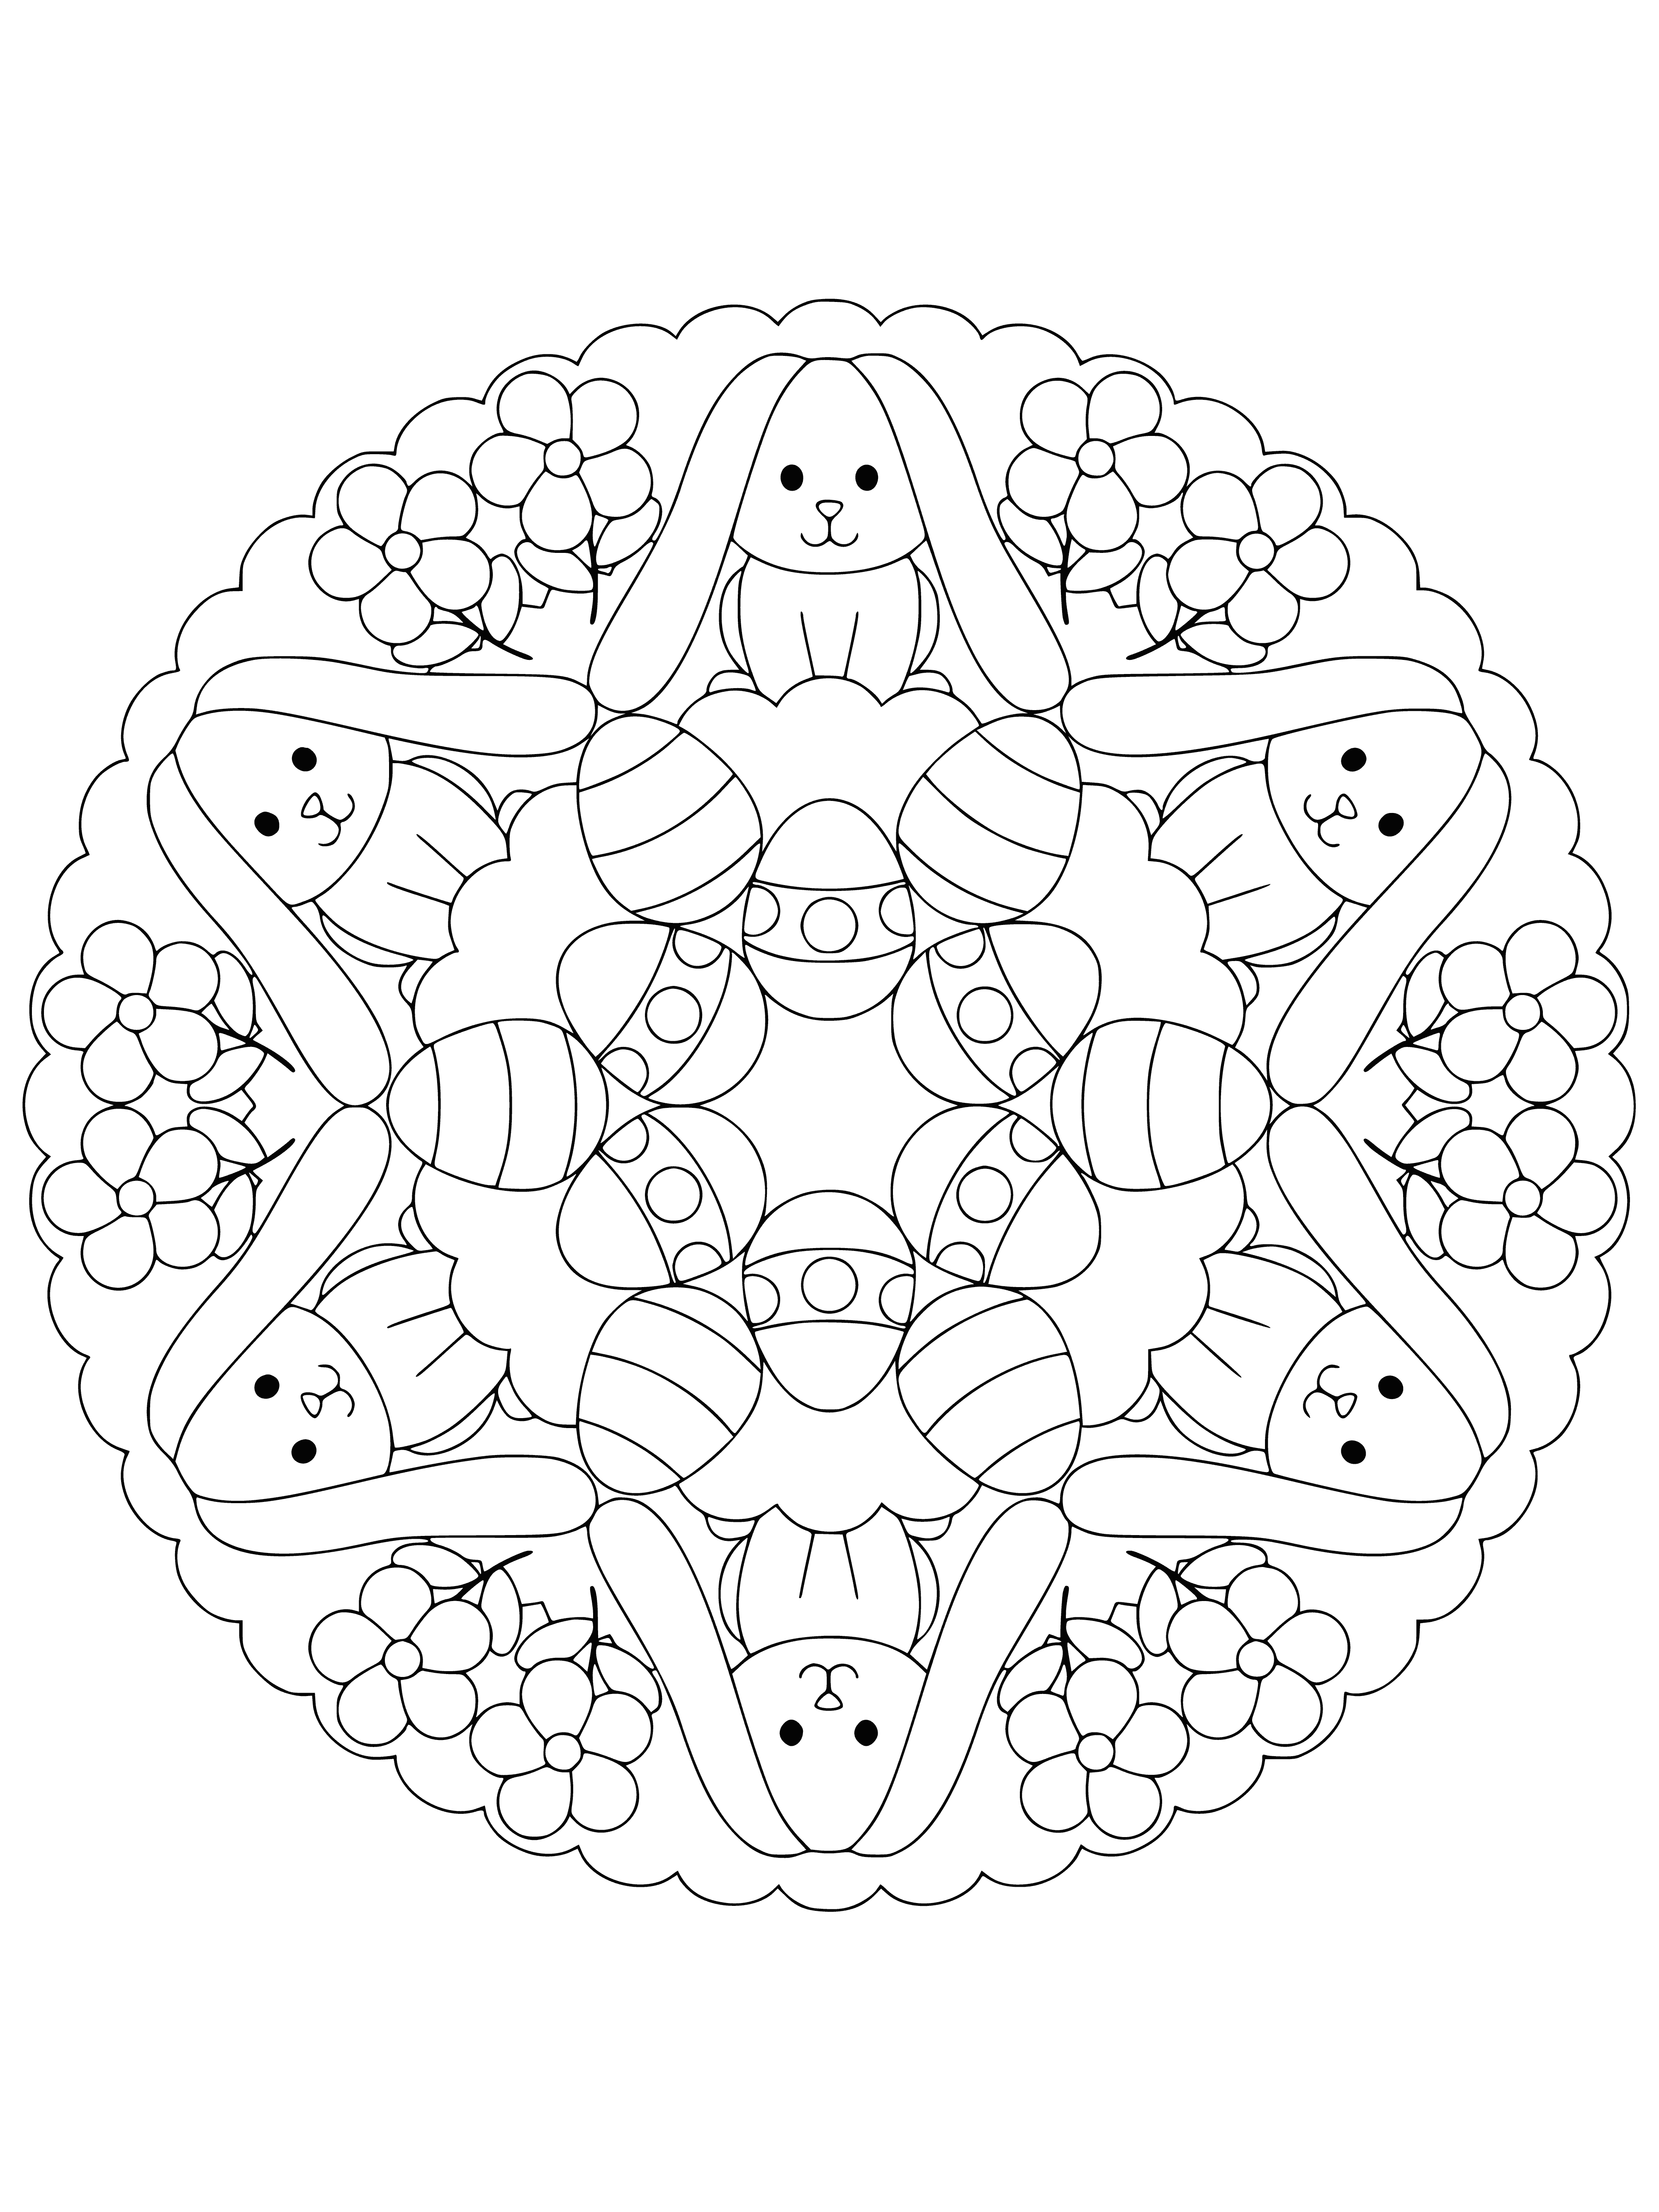 coloring page: Two fluffy bunnies holding eggs in a colorful mandala with detailed patterns and flowers ???